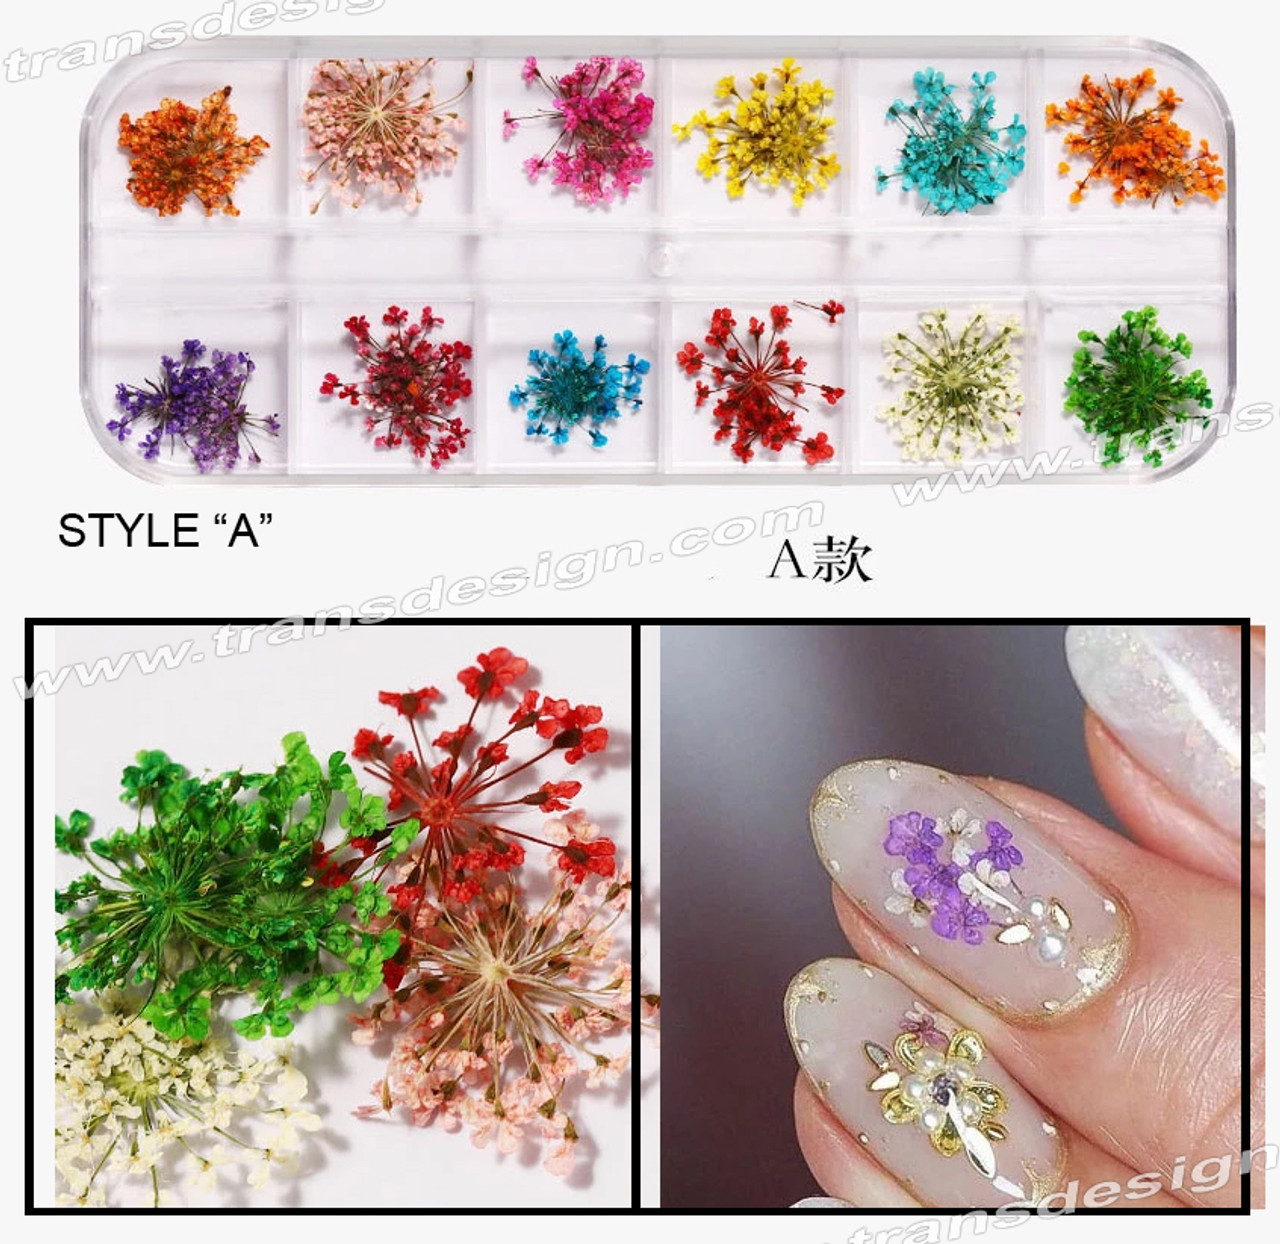 Image-Pic - Beautiful Flower Nail Art Designs & Ideas 💅❤️ Flower designs  on nails are always super cute, simple and elegant. #nailart #naildesign  #nailpolish #nailswag #nail #flowernails #flowernailart Source:  https://wpicc.blogspot.com/2020/01/nail ...